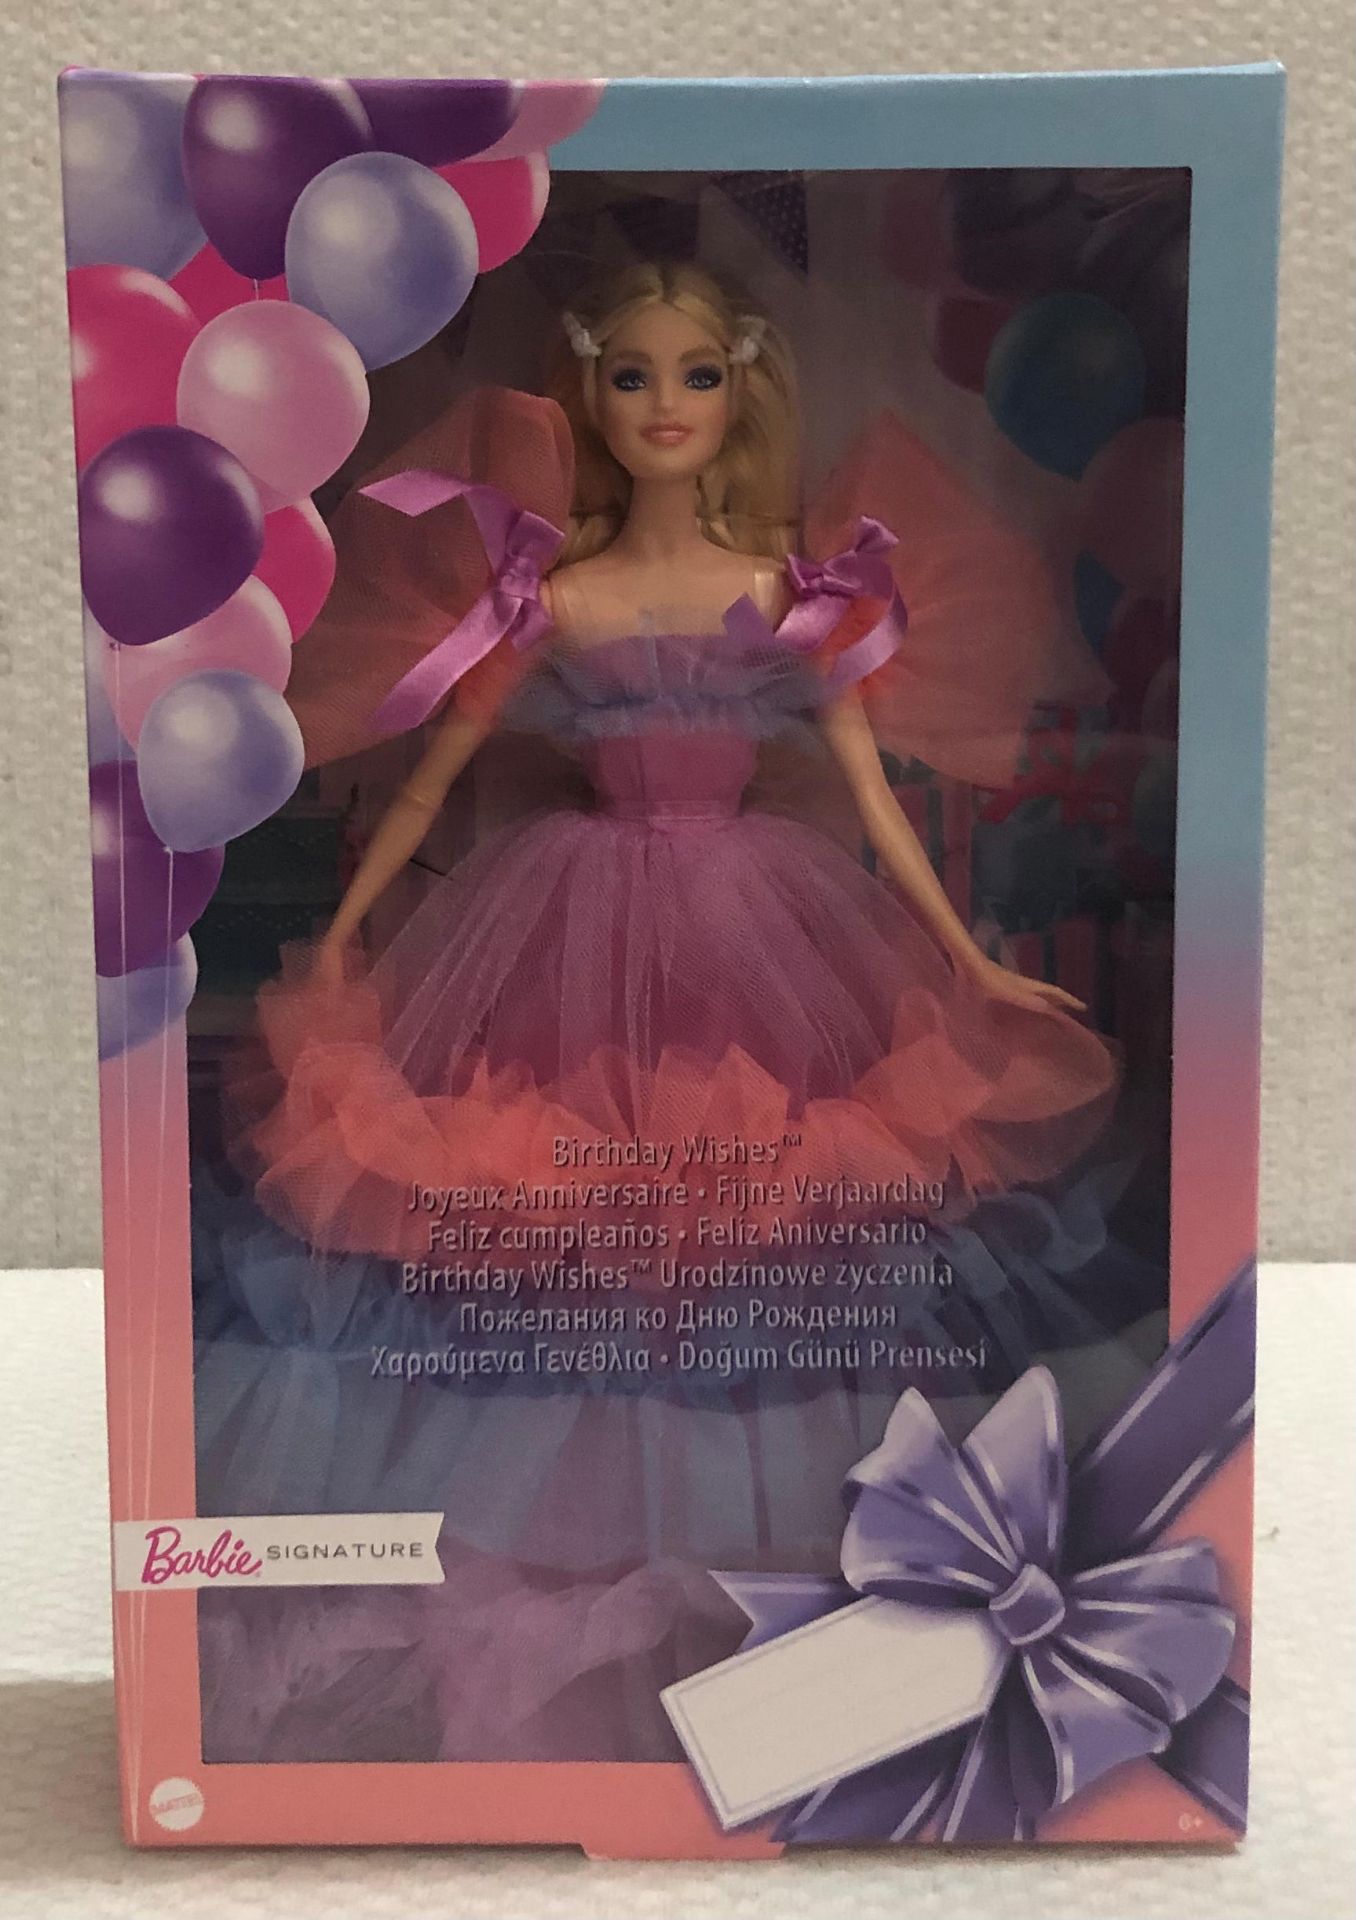 1 x Barbie Signature Birthday Wishes Doll 2021 - New/Boxed - Image 2 of 4